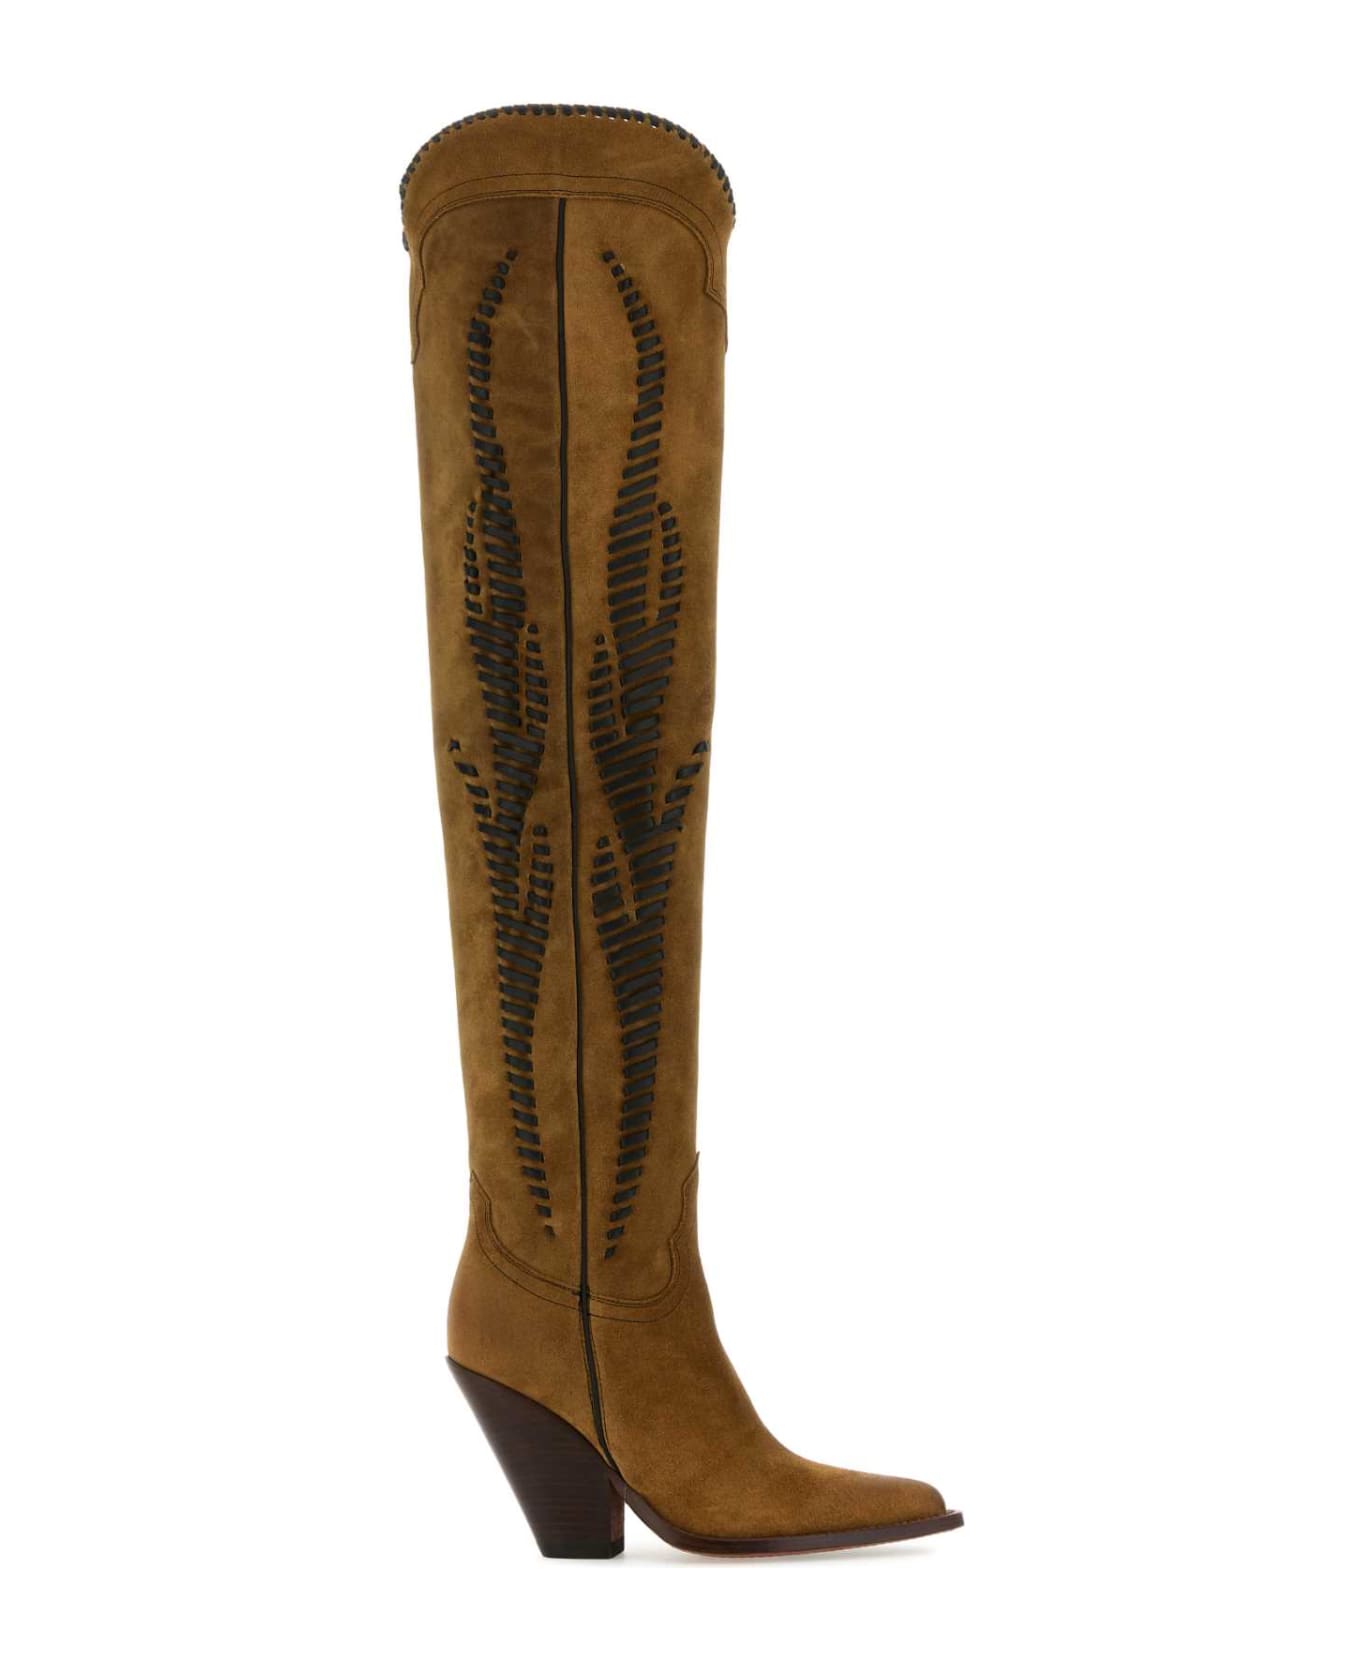 Sonora Camel Suede Hermosa Twist Over-the-knee Boots - CAMEL ブーツ